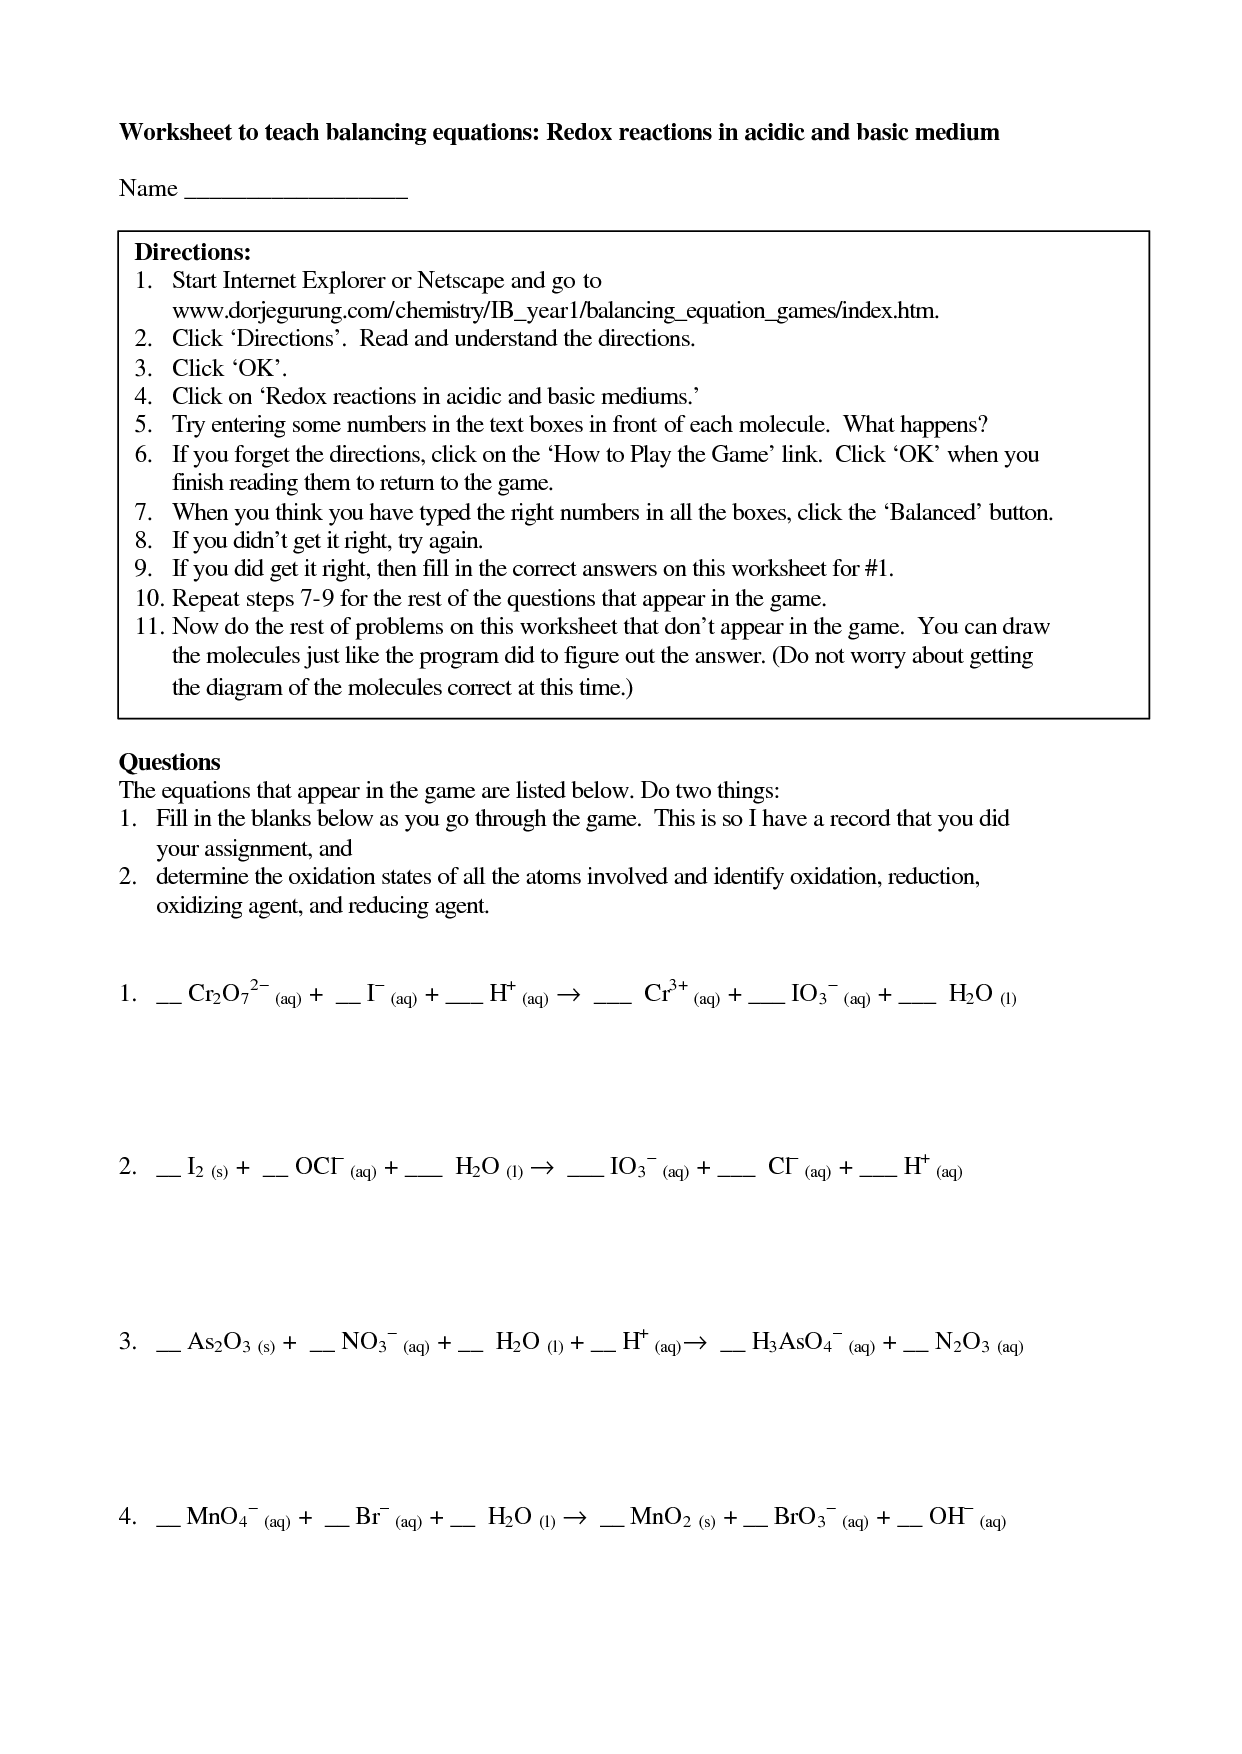 7 Best Images of Basic Chemical Reactions Worksheet - Balancing Redox ...